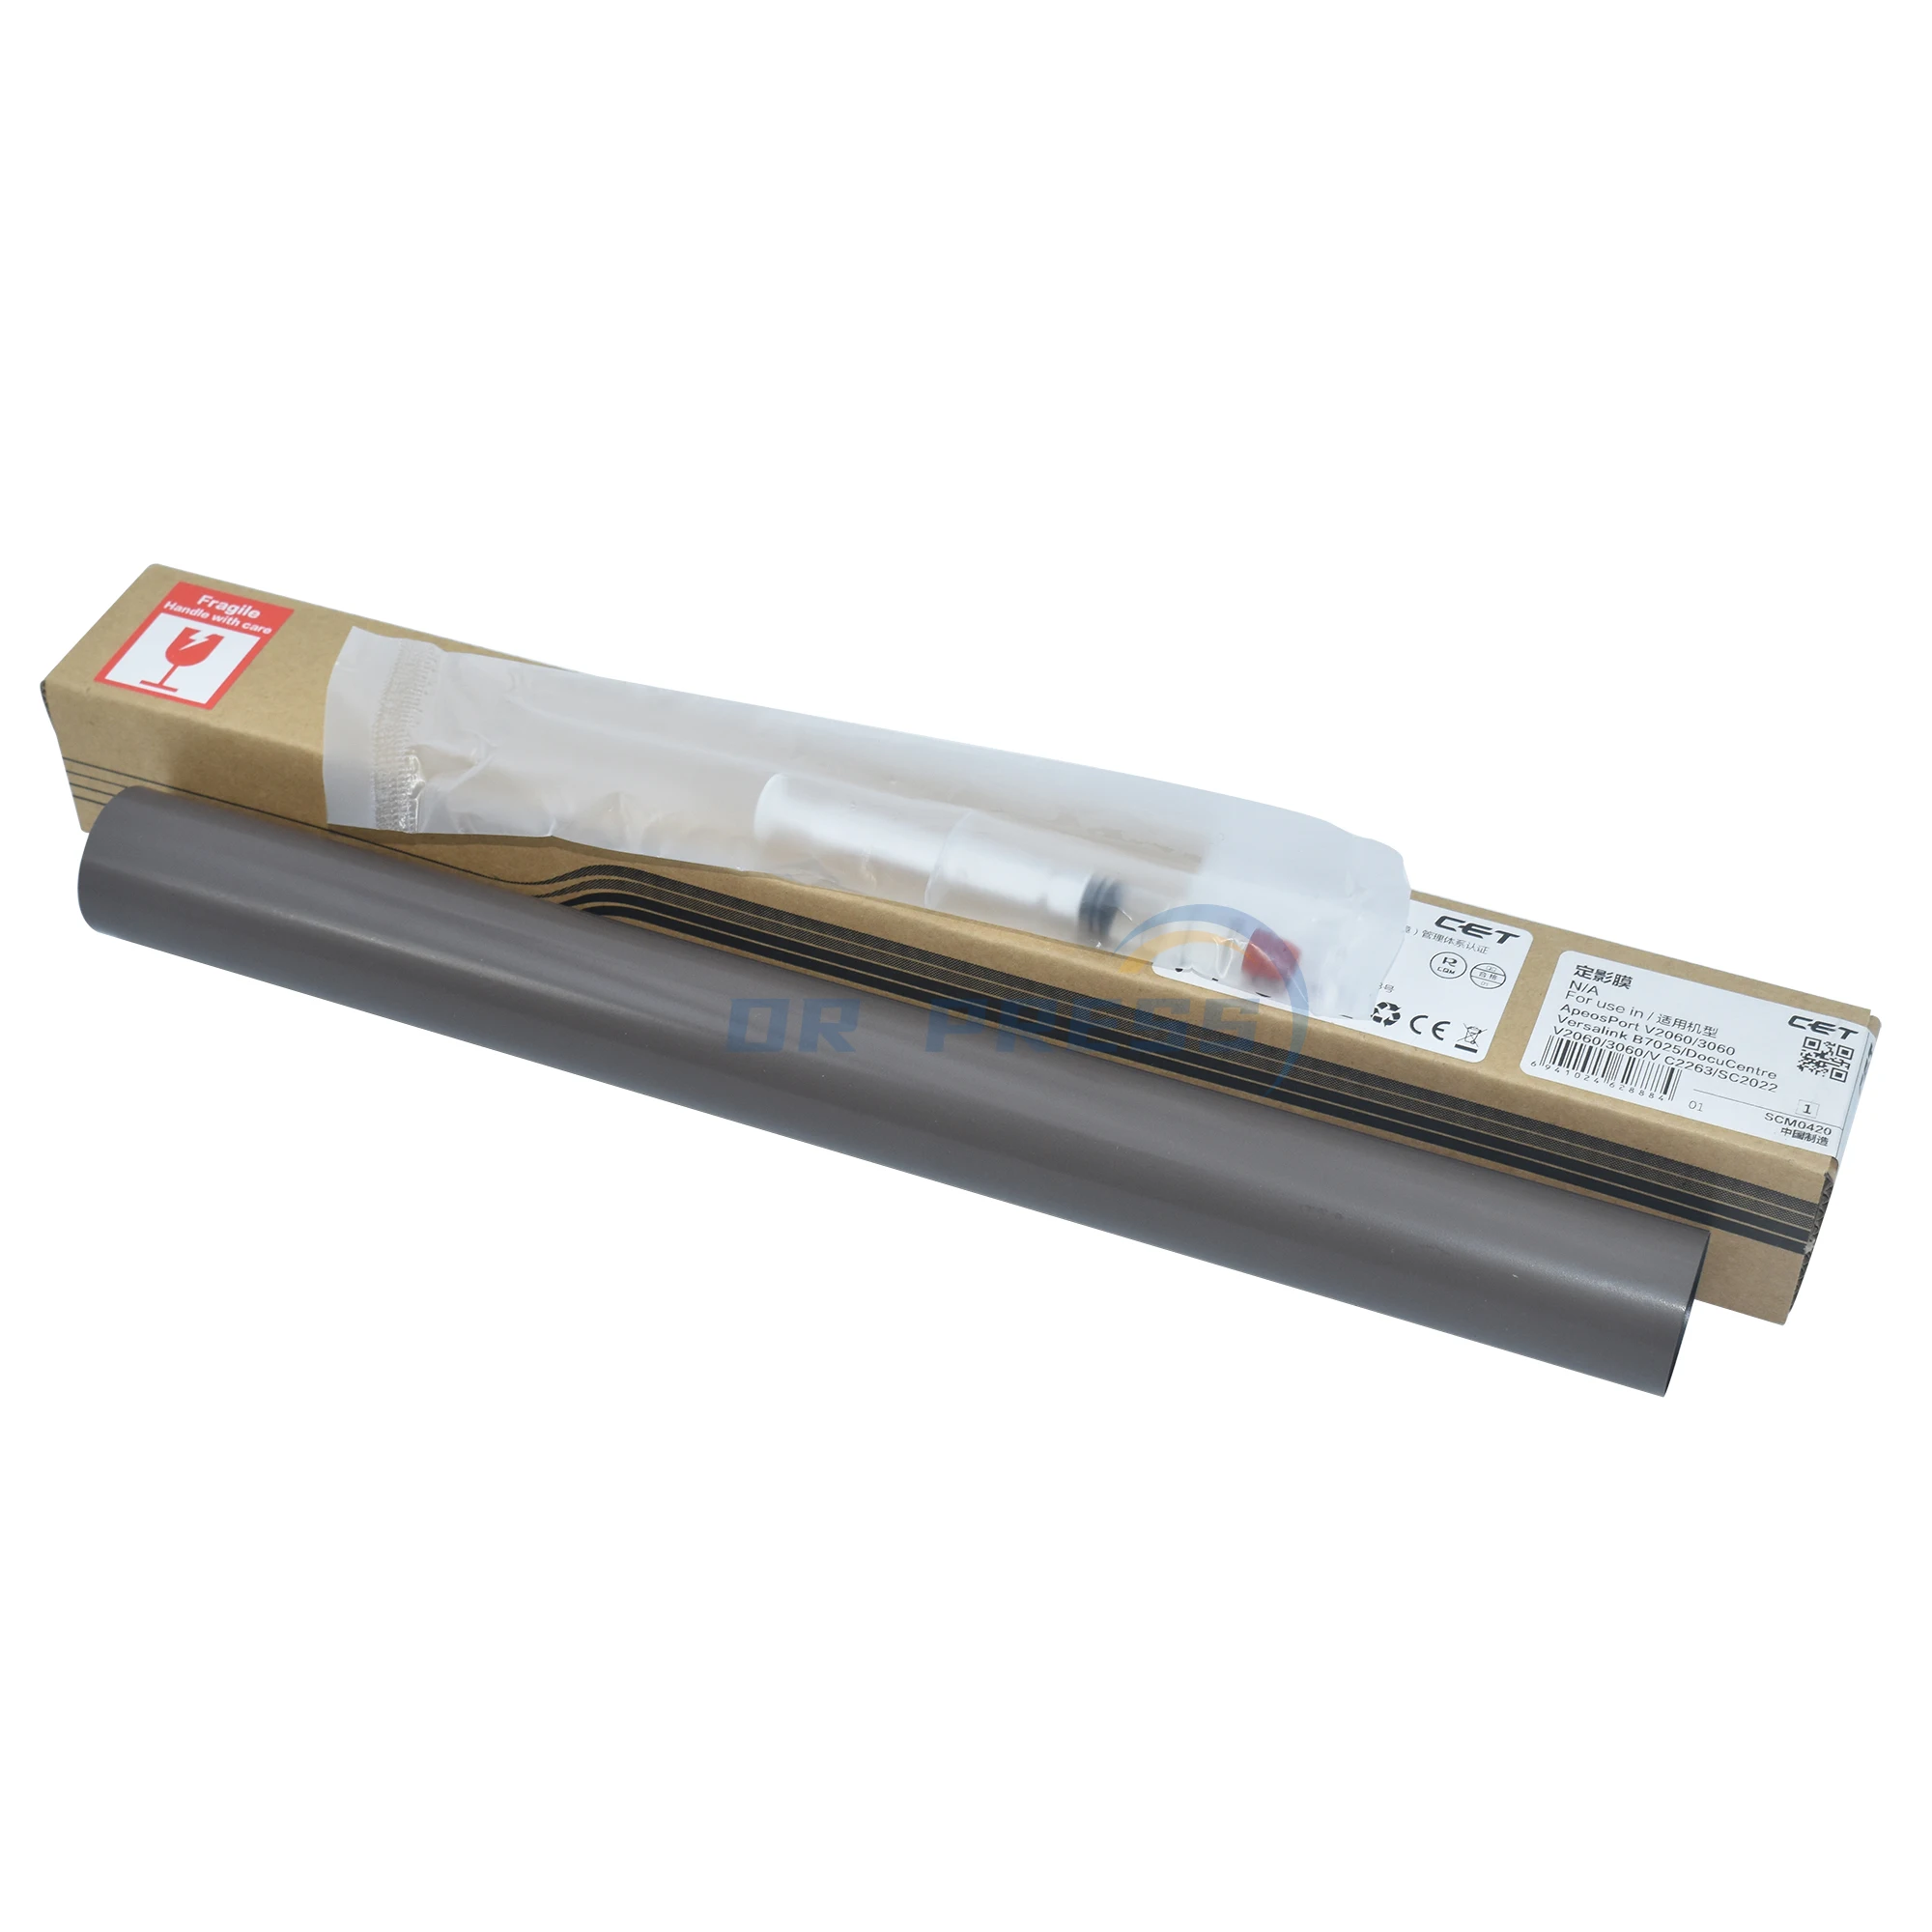 

for CET Fuser Fixing Film for Xerox VersaLink B7025 B7030 B7035 C7020 C7025 C7030 with Grease